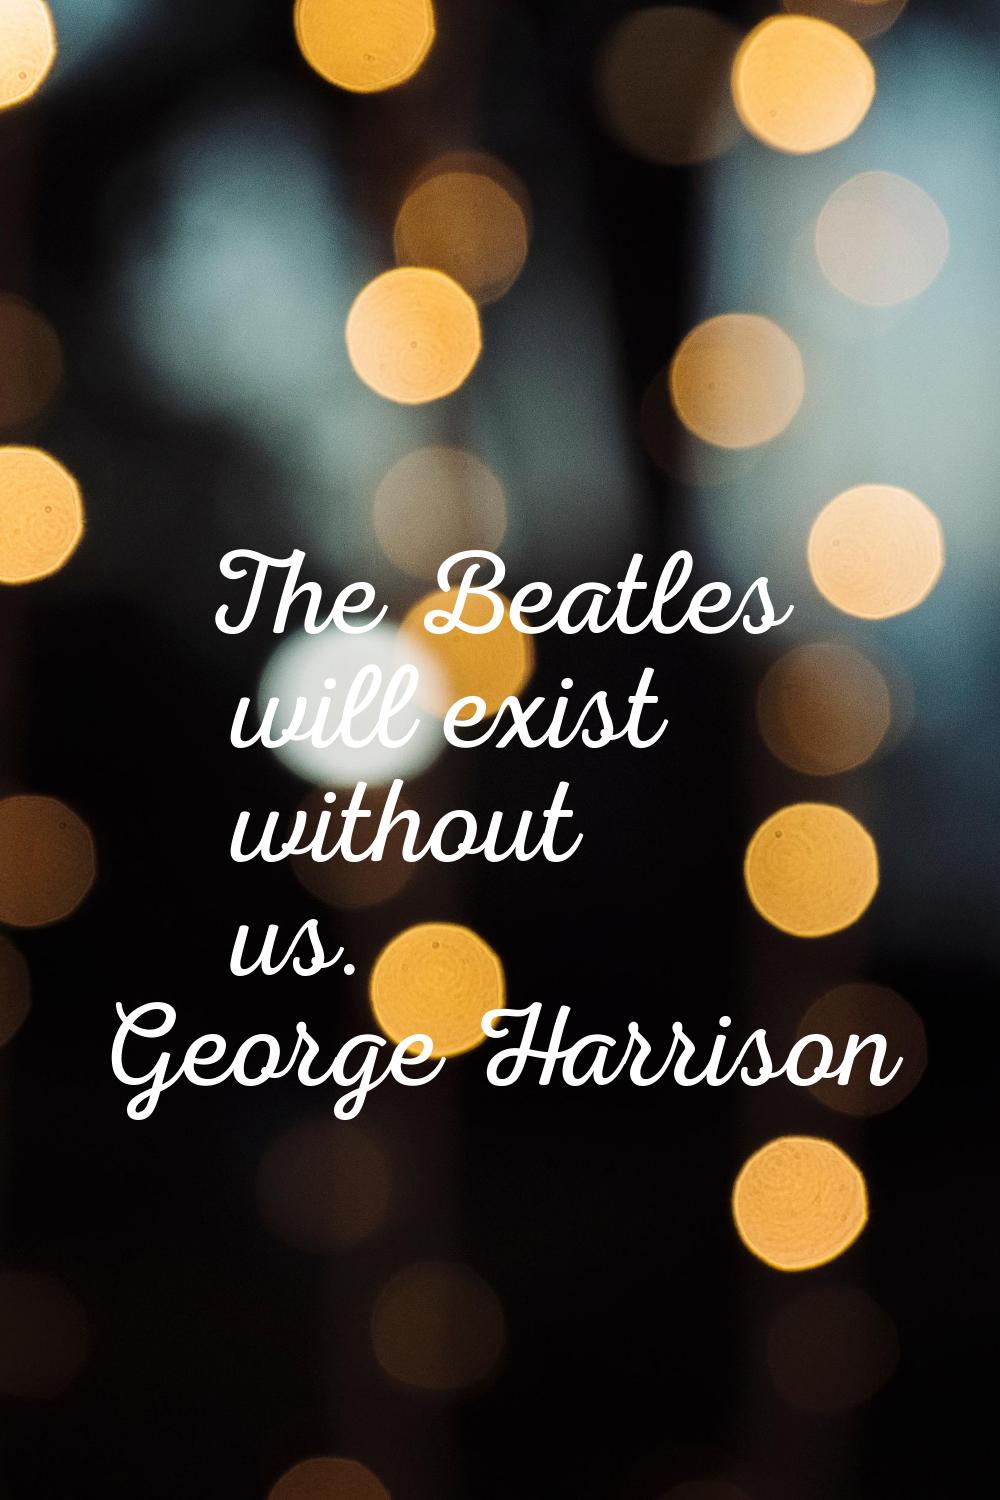 The Beatles will exist without us.